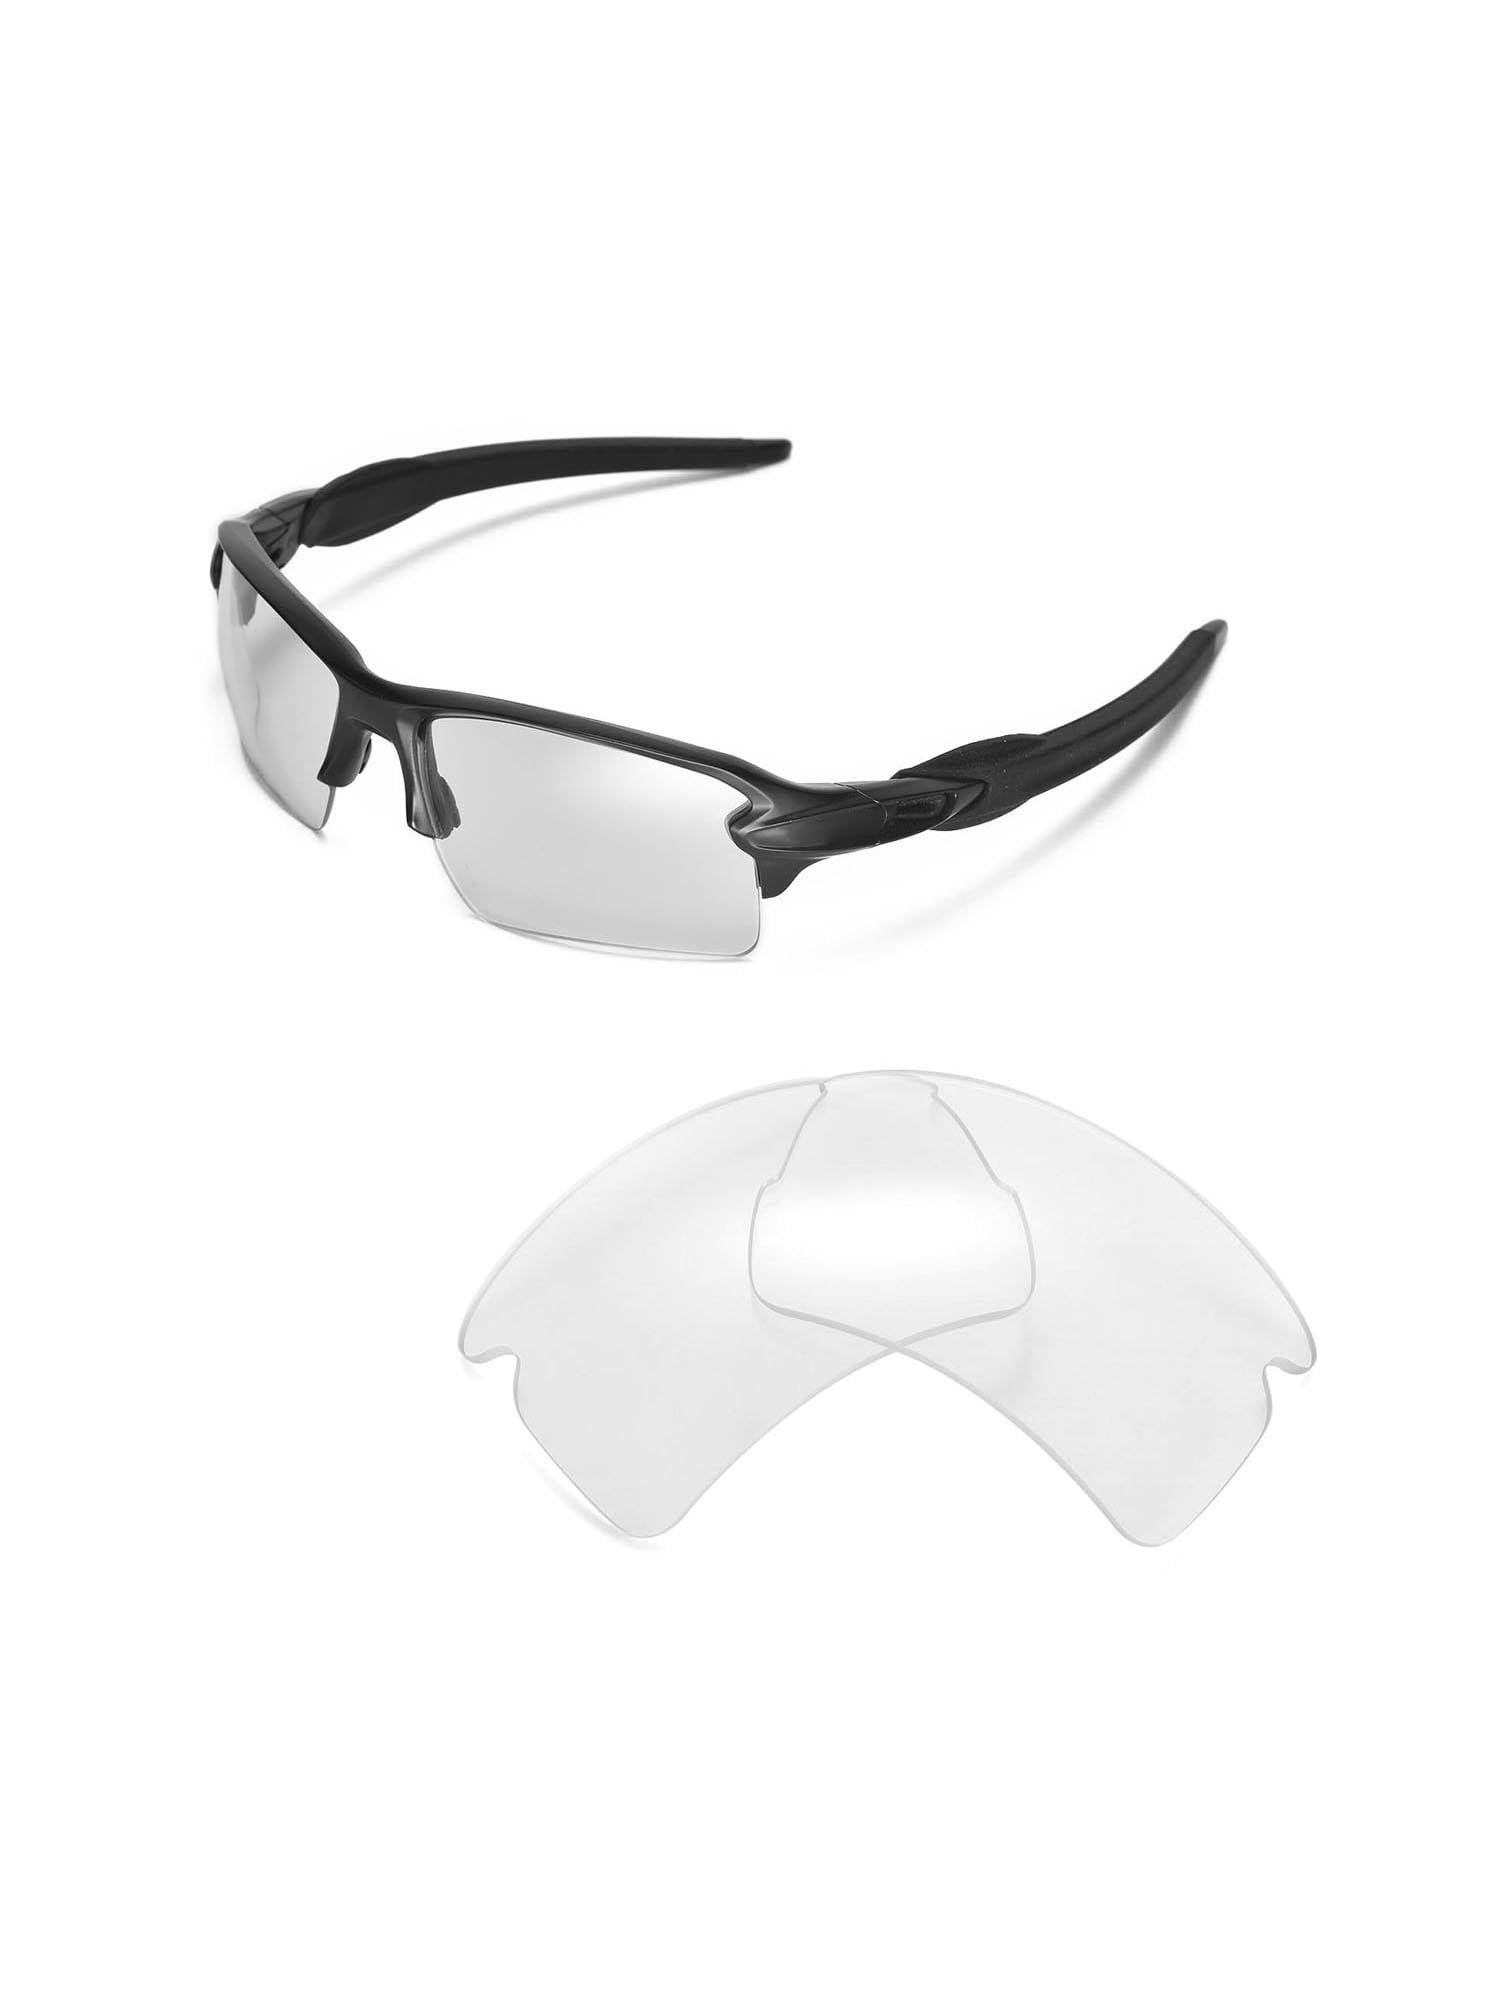 replacement parts for oakley glasses